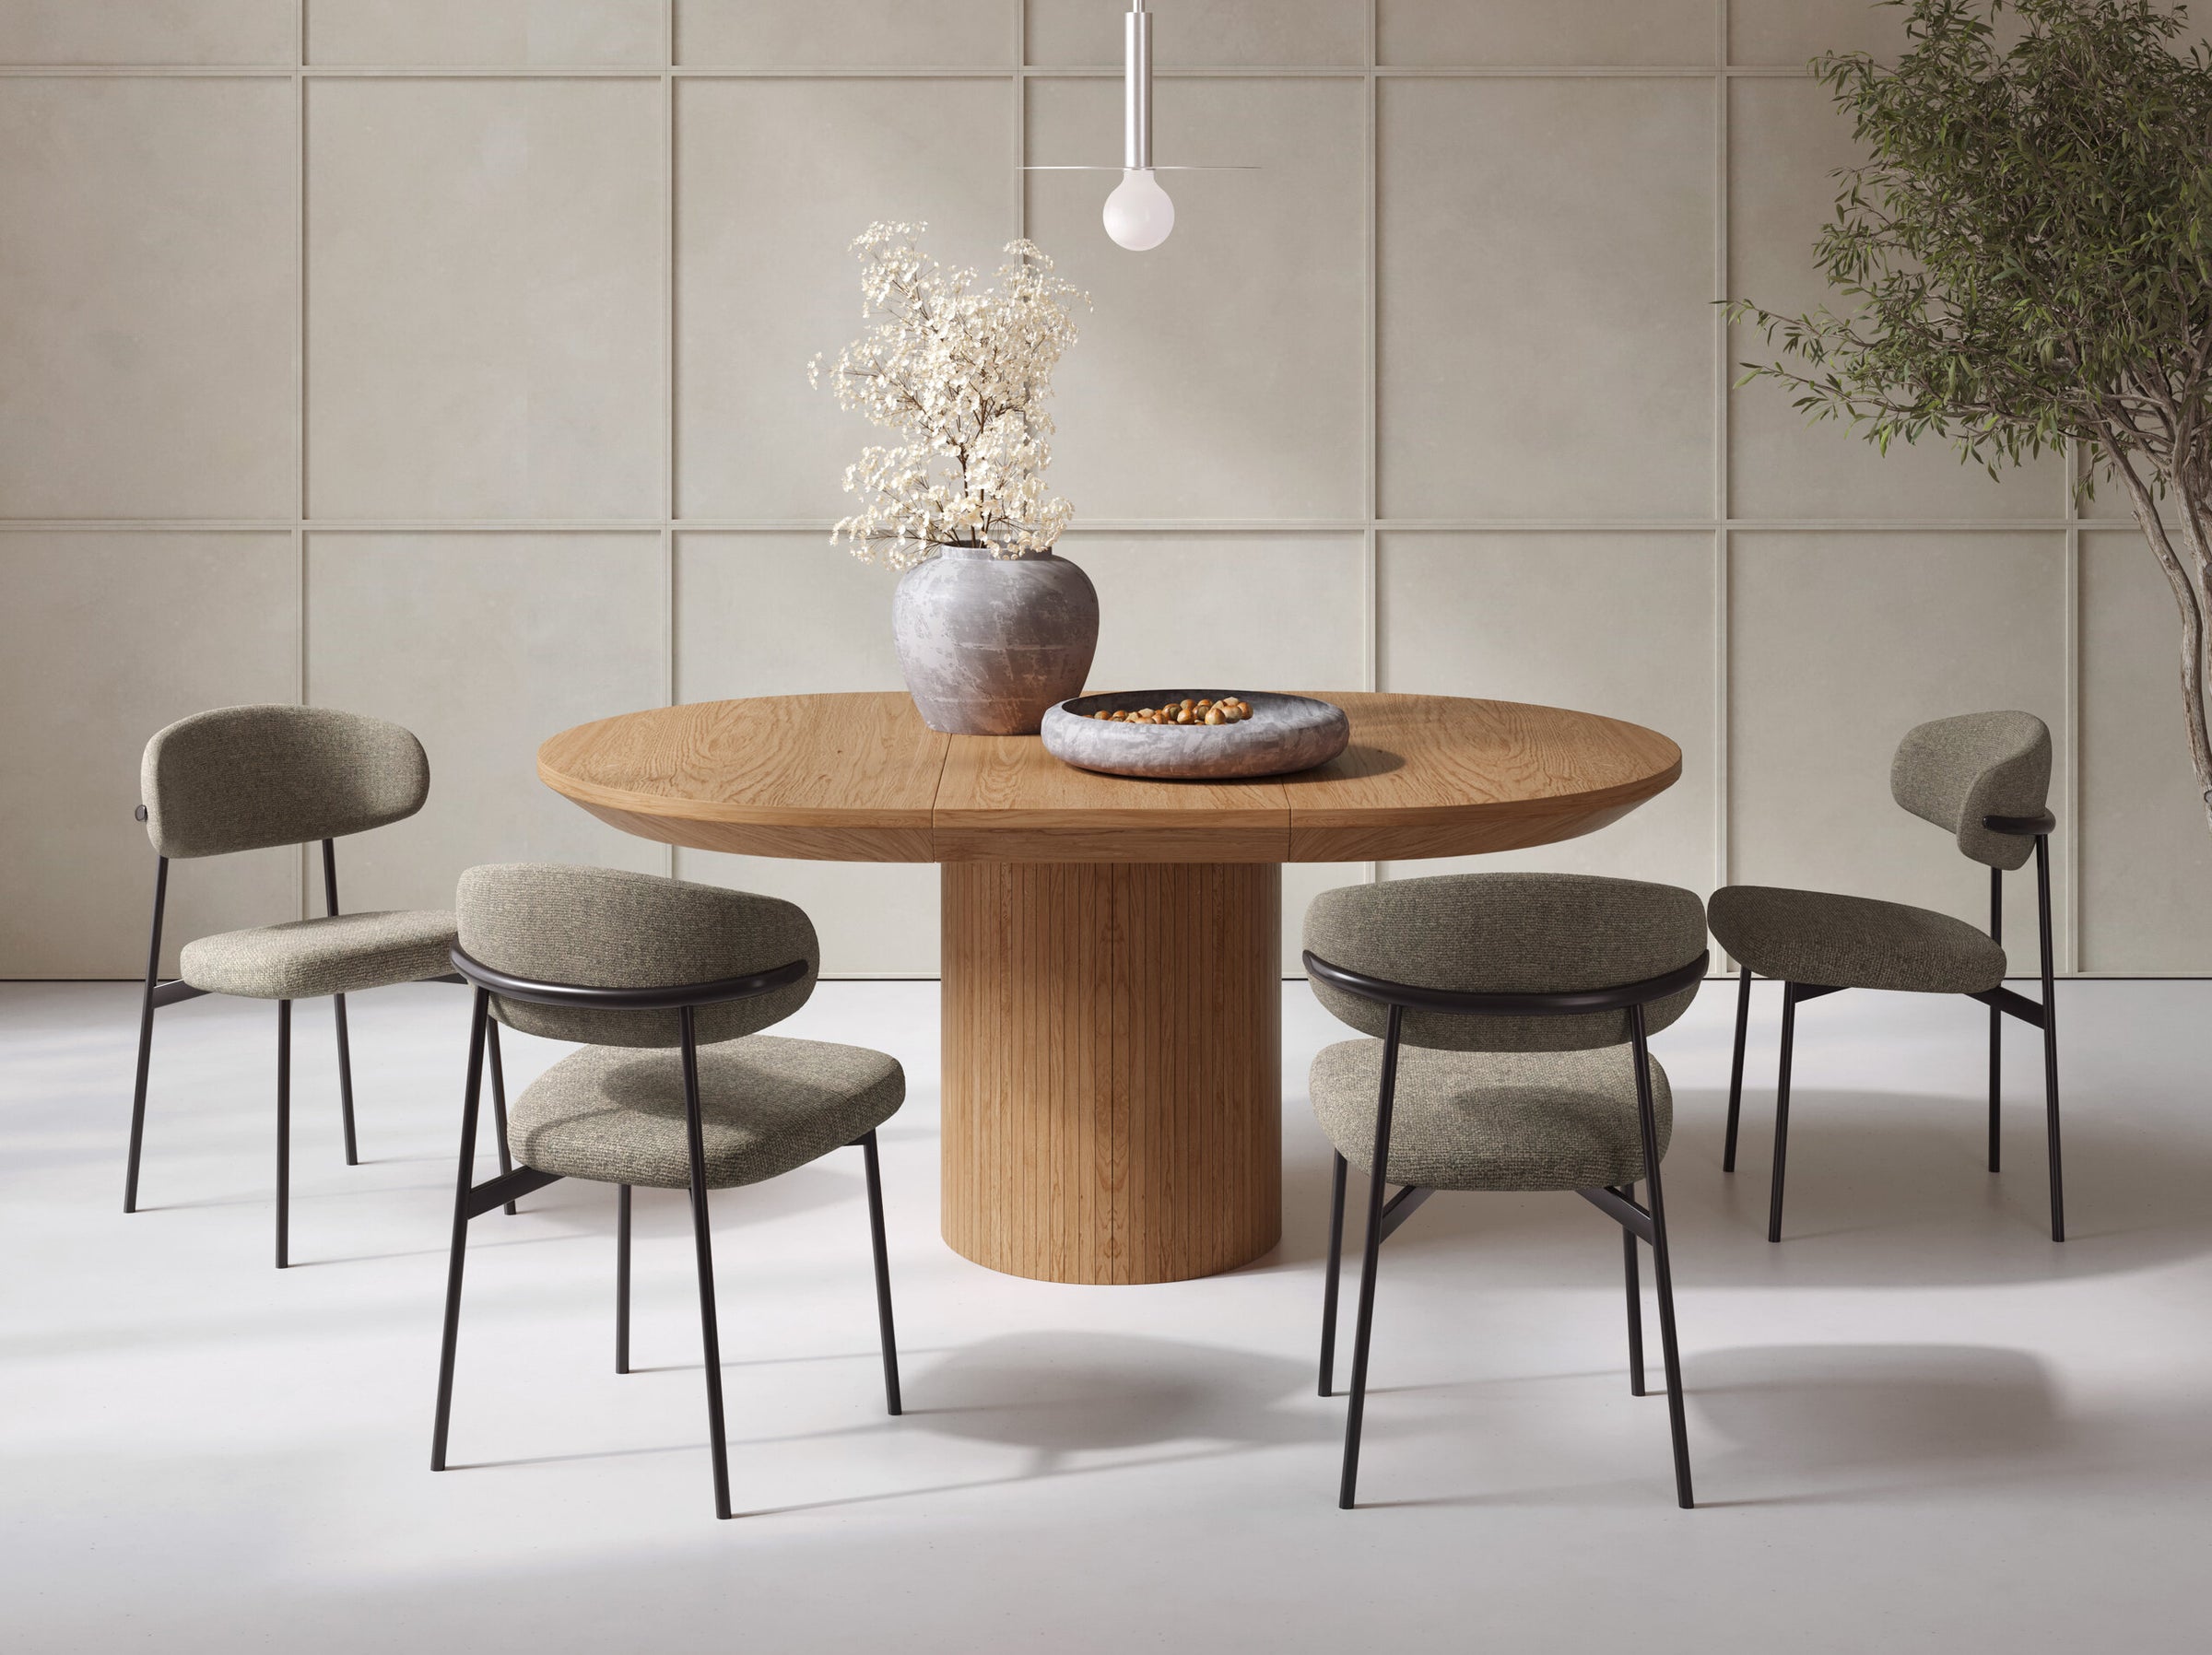 Sander tables & chairs chenille beige